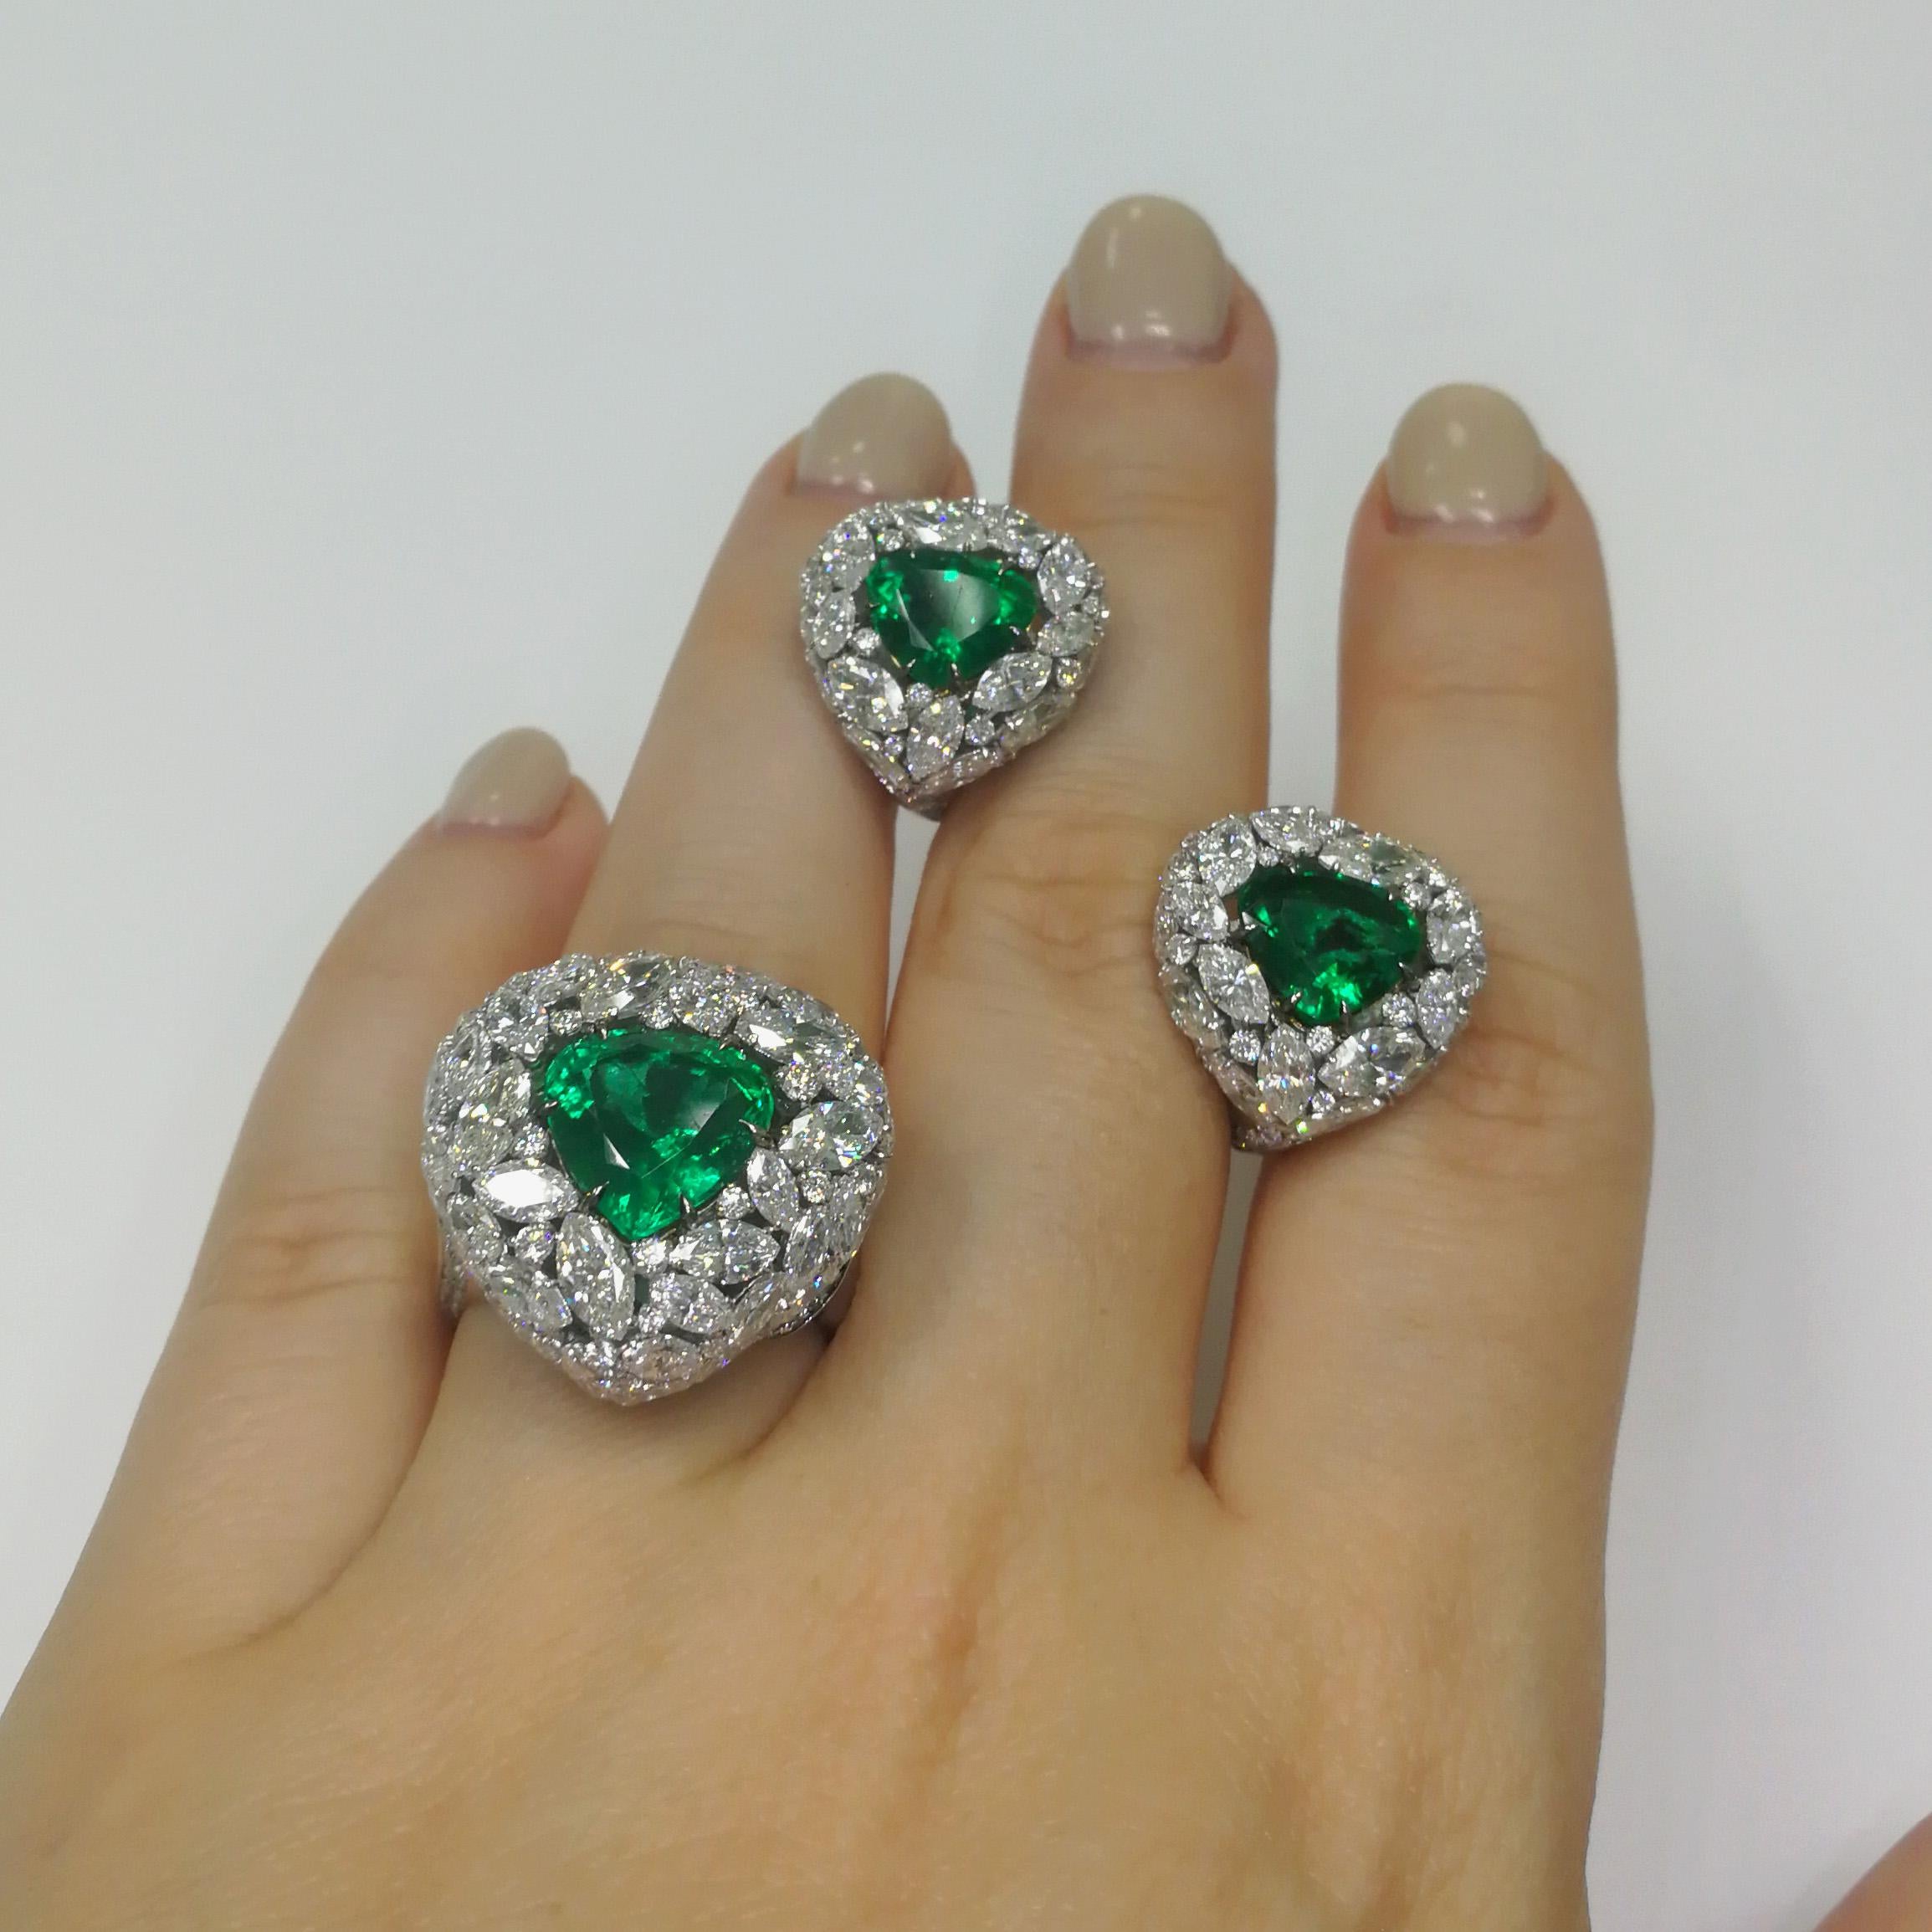 Emeralds Diamonds 18 Karat White Gold Suite
What could be more elegant than a combination of cold 18 Karat White Gold, Diamonds and a bright spot of color in the form of an Emerald? Right, nothing. Marquise-shape Diamonds and round-shape Diamonds,